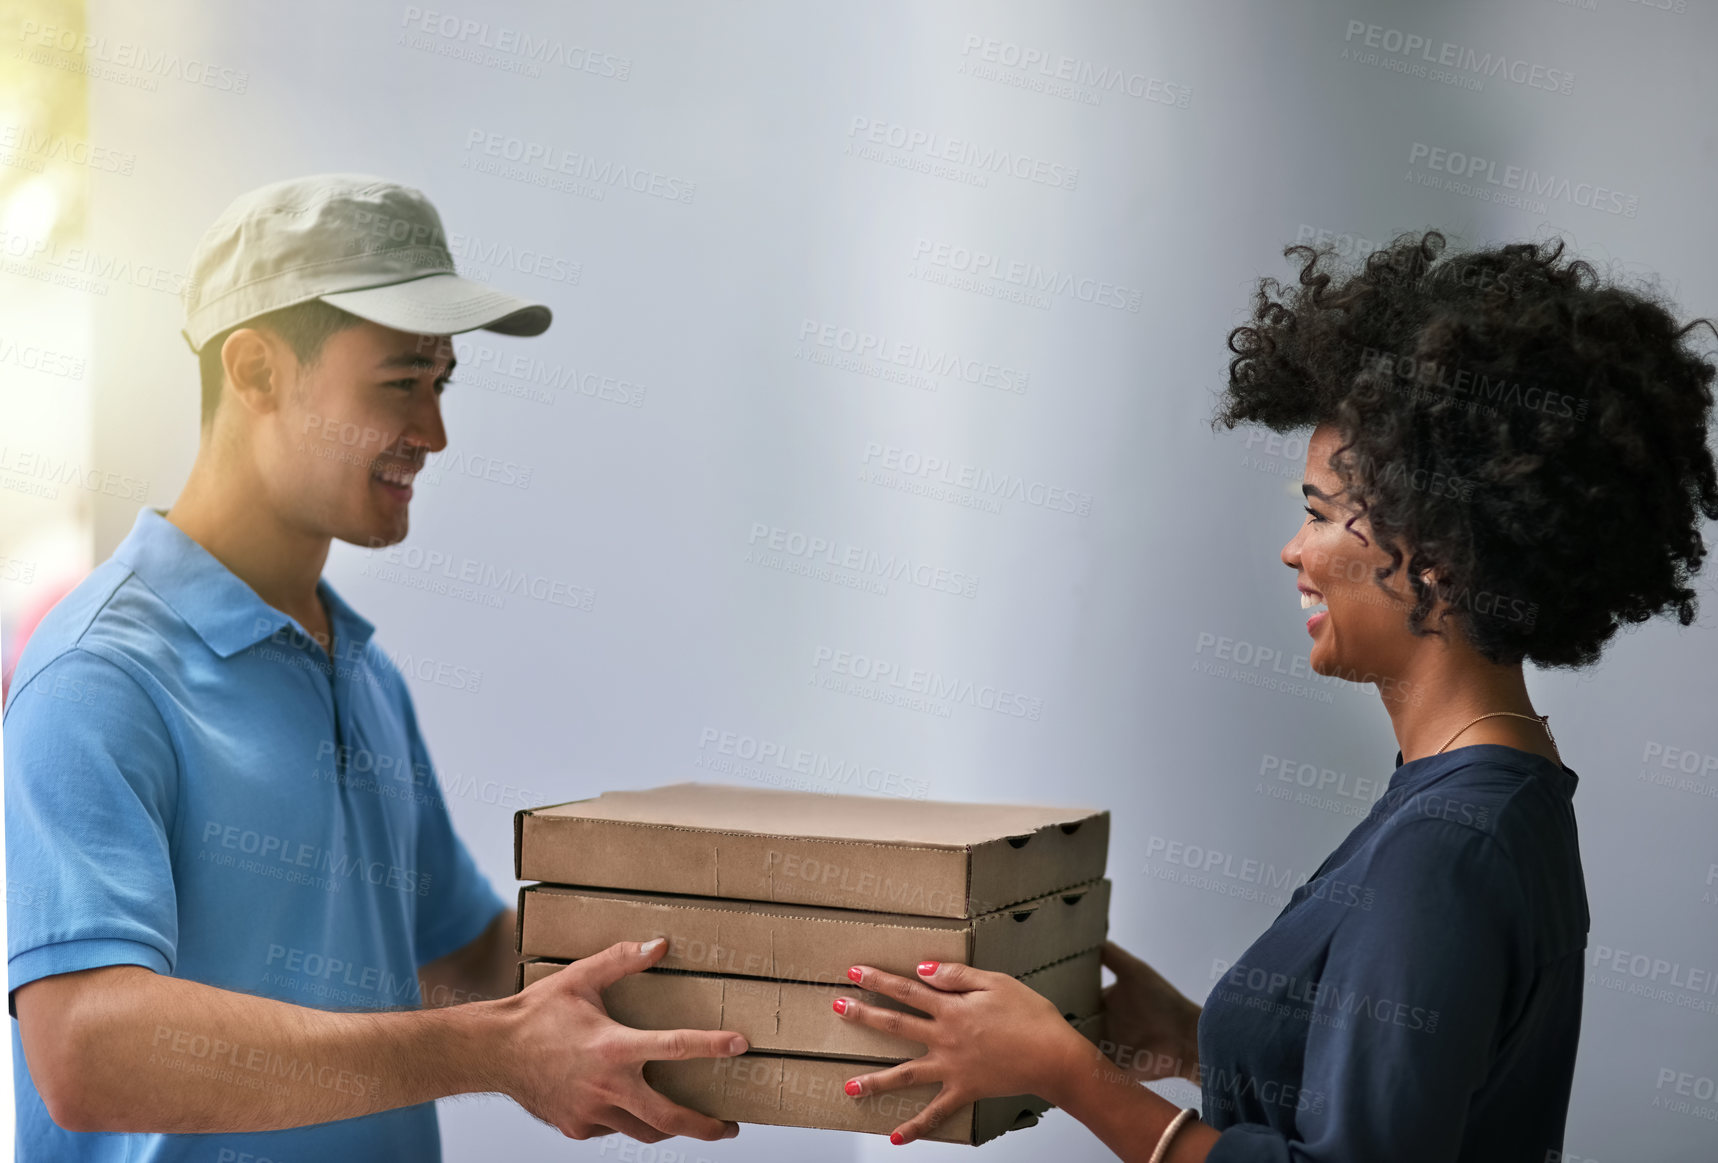 Buy stock photo Shot of a happy businesswoman accepting a pizza delivery from a delivery man in the office